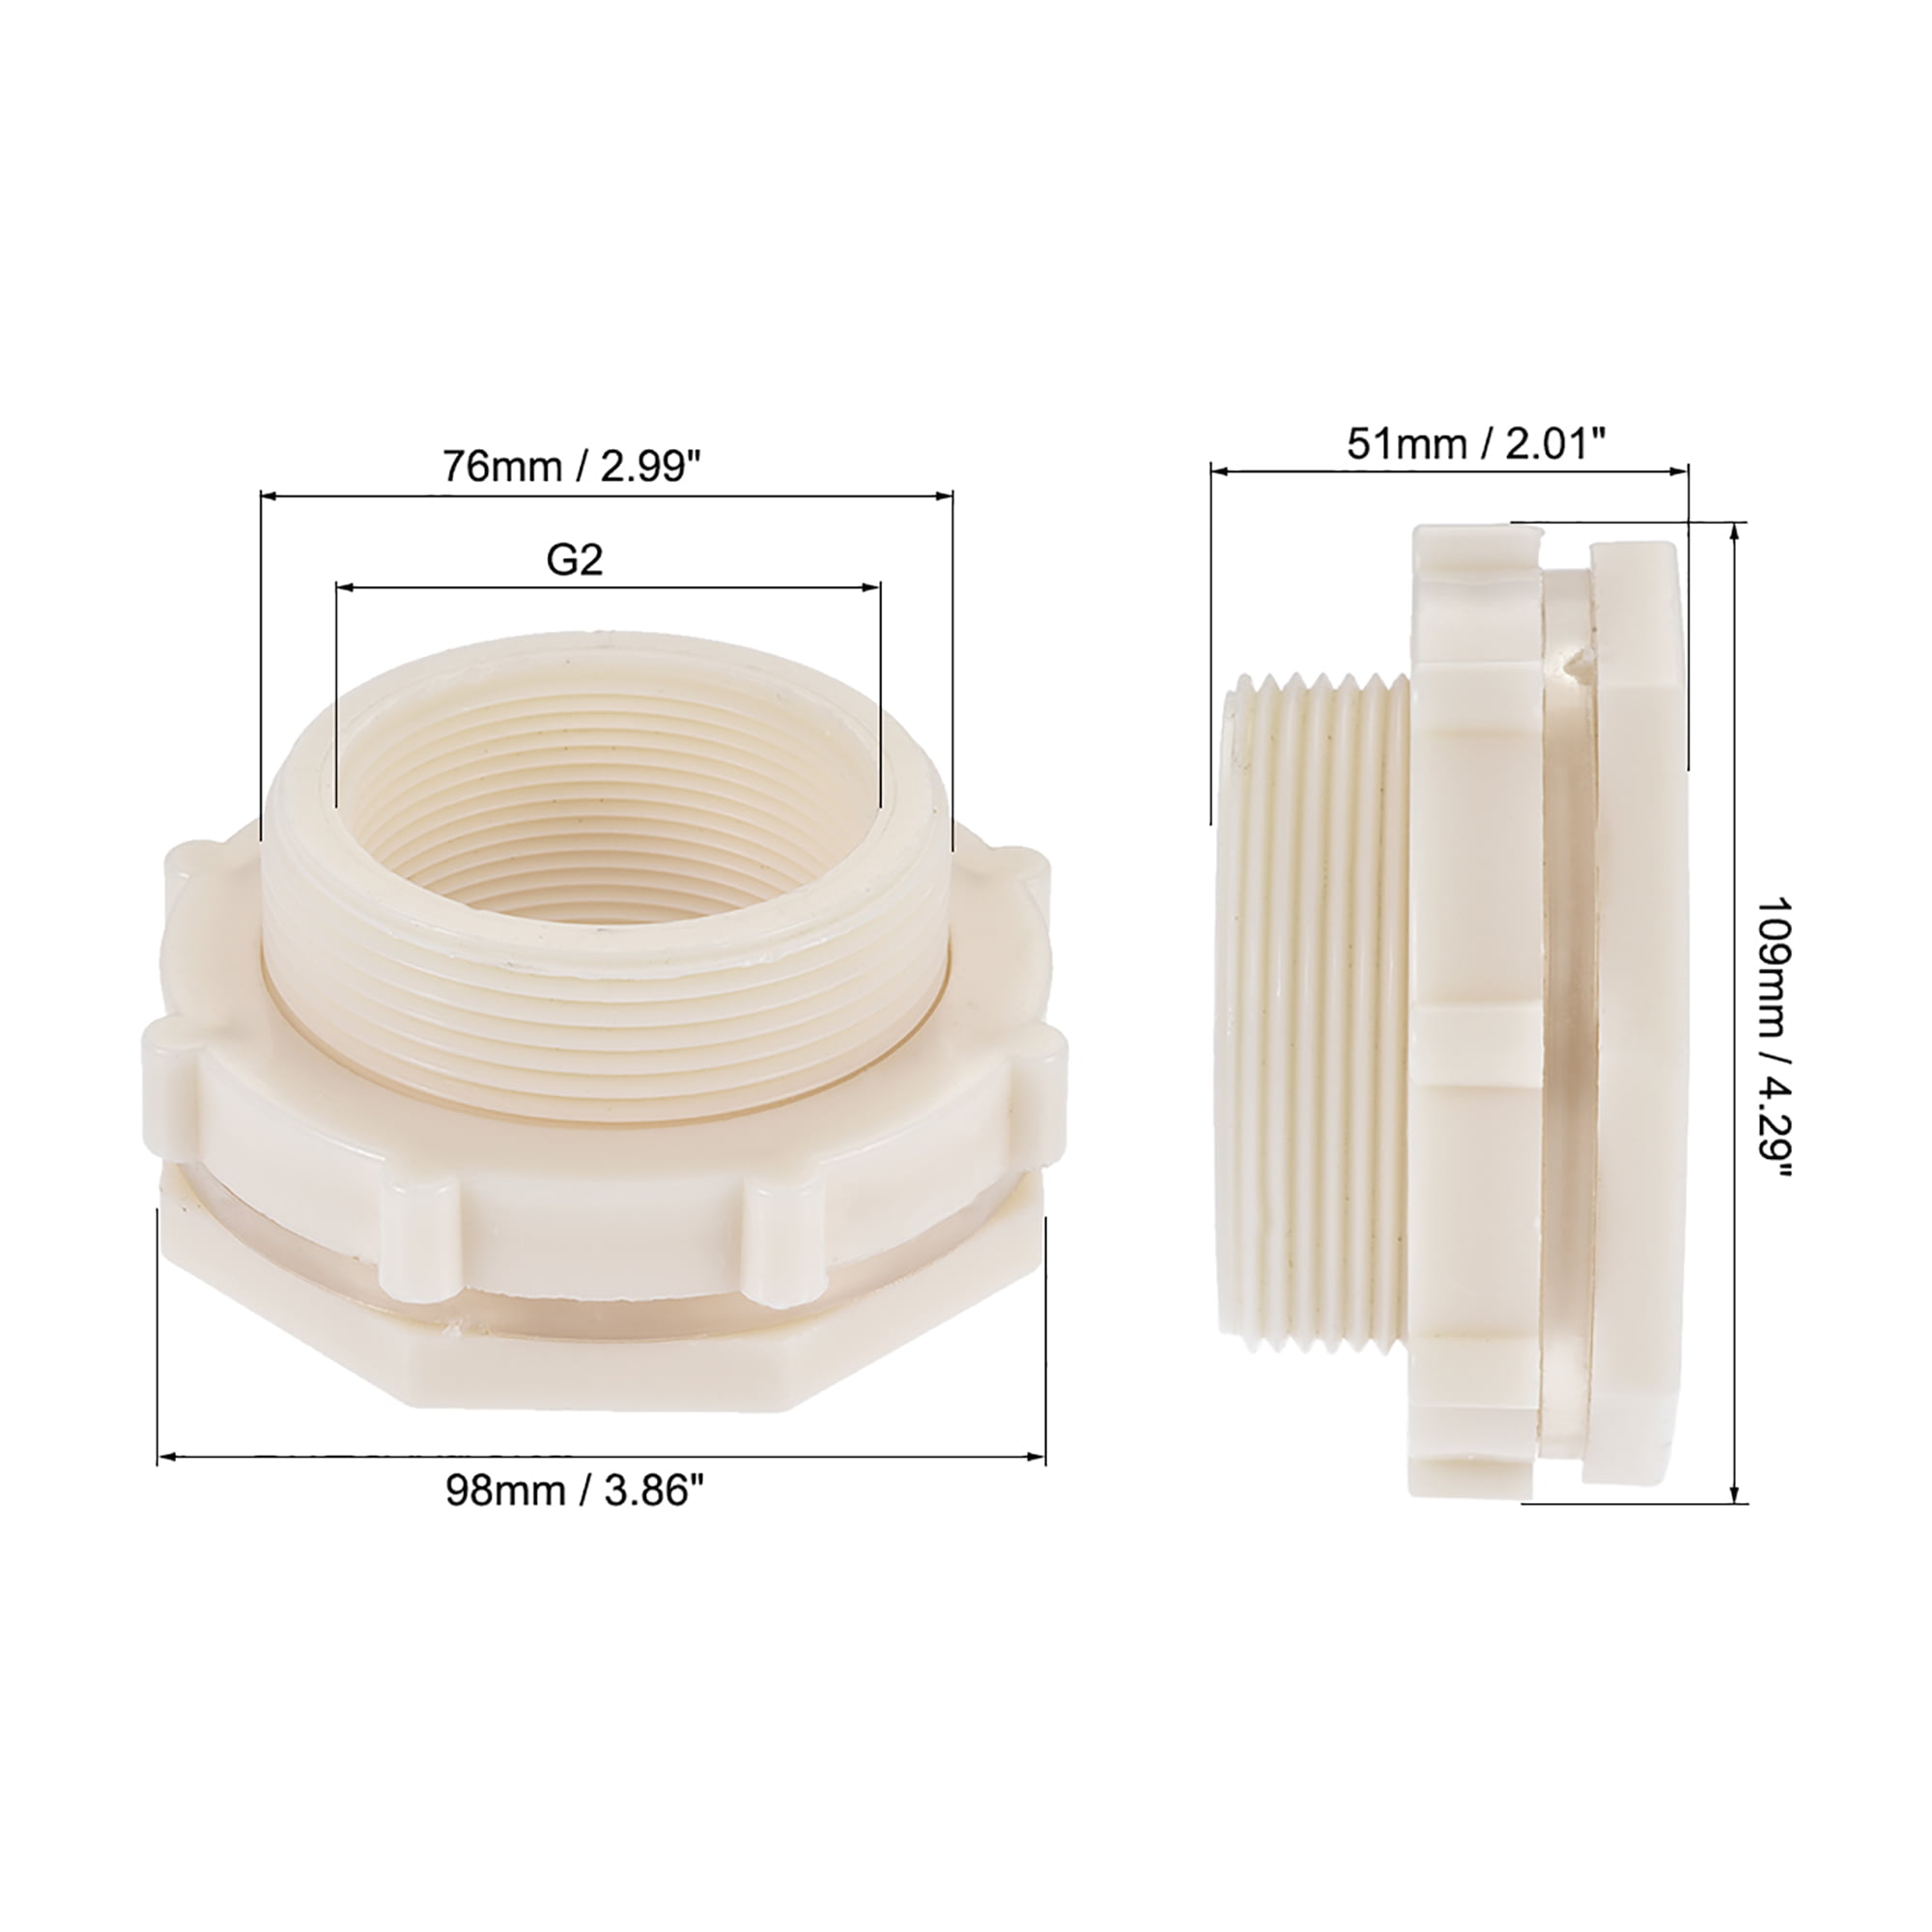 White uxcell Bulkhead Fitting for Water Tanks with Silicone Gasket and Pipe Connector PVC G2 Female 2.99 Male Tube Adaptor Fitting 